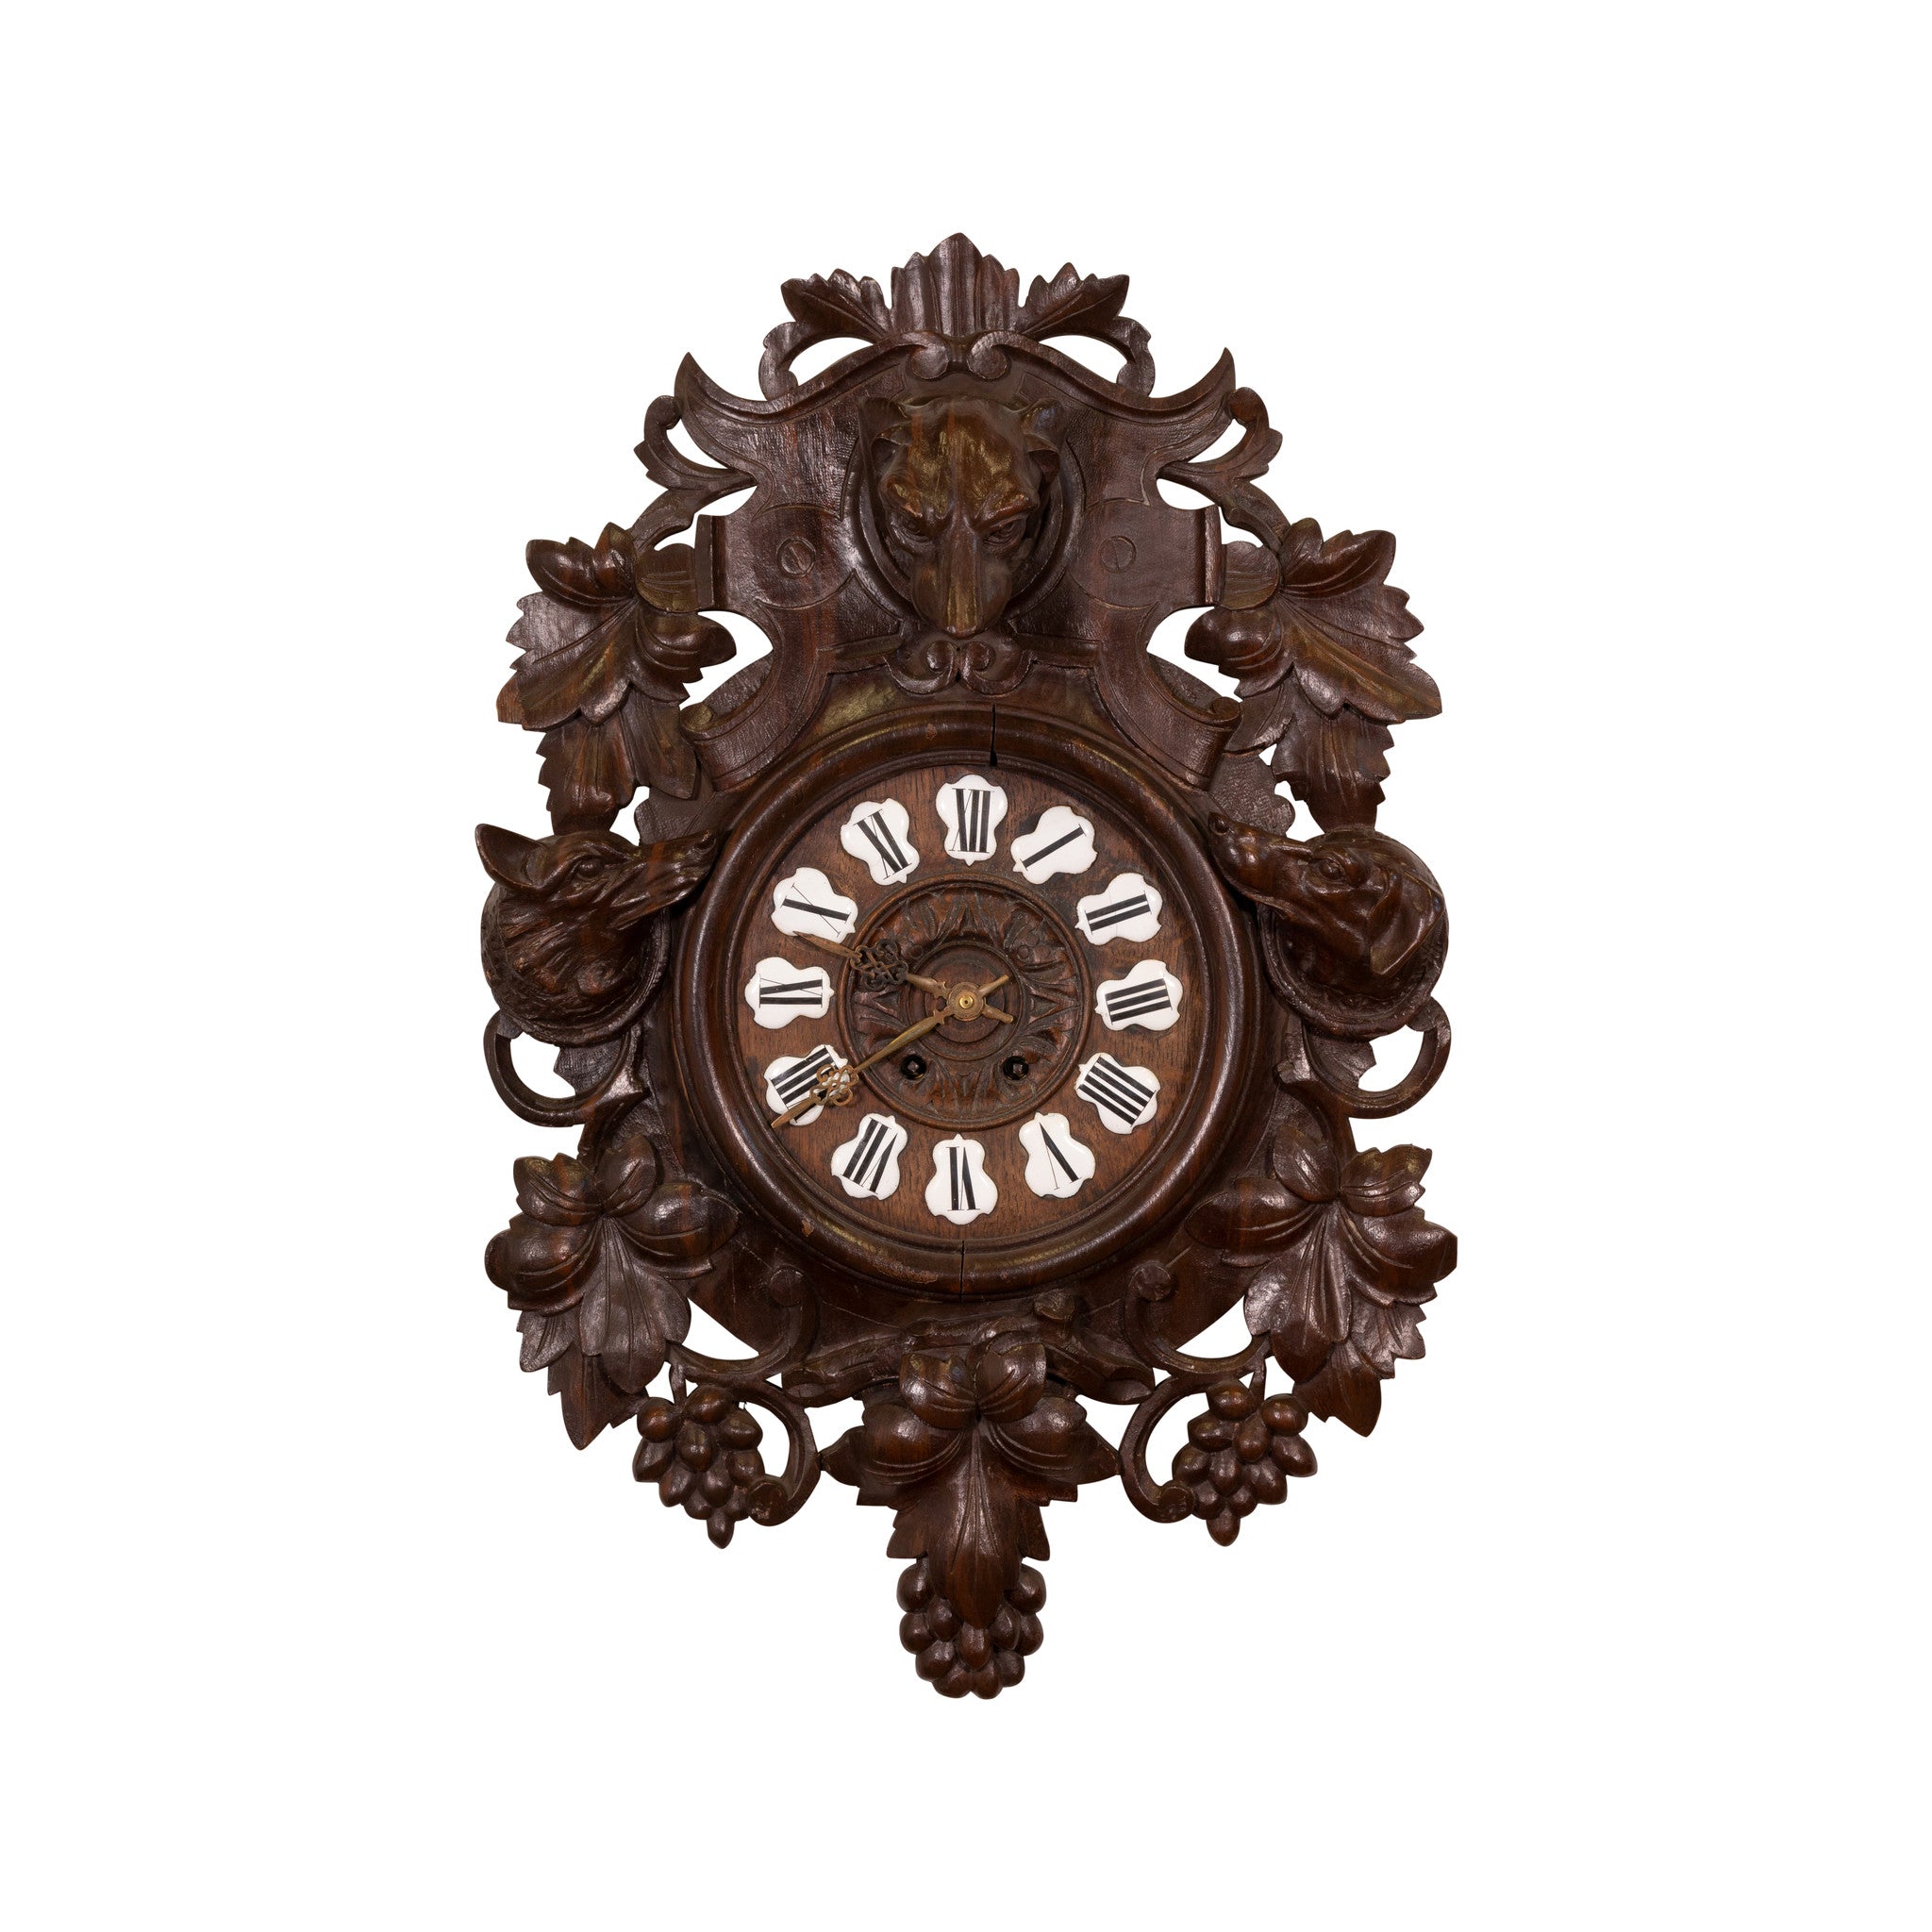 Hand Carved Wall Clock, Furnishings, Black Forest, Clock